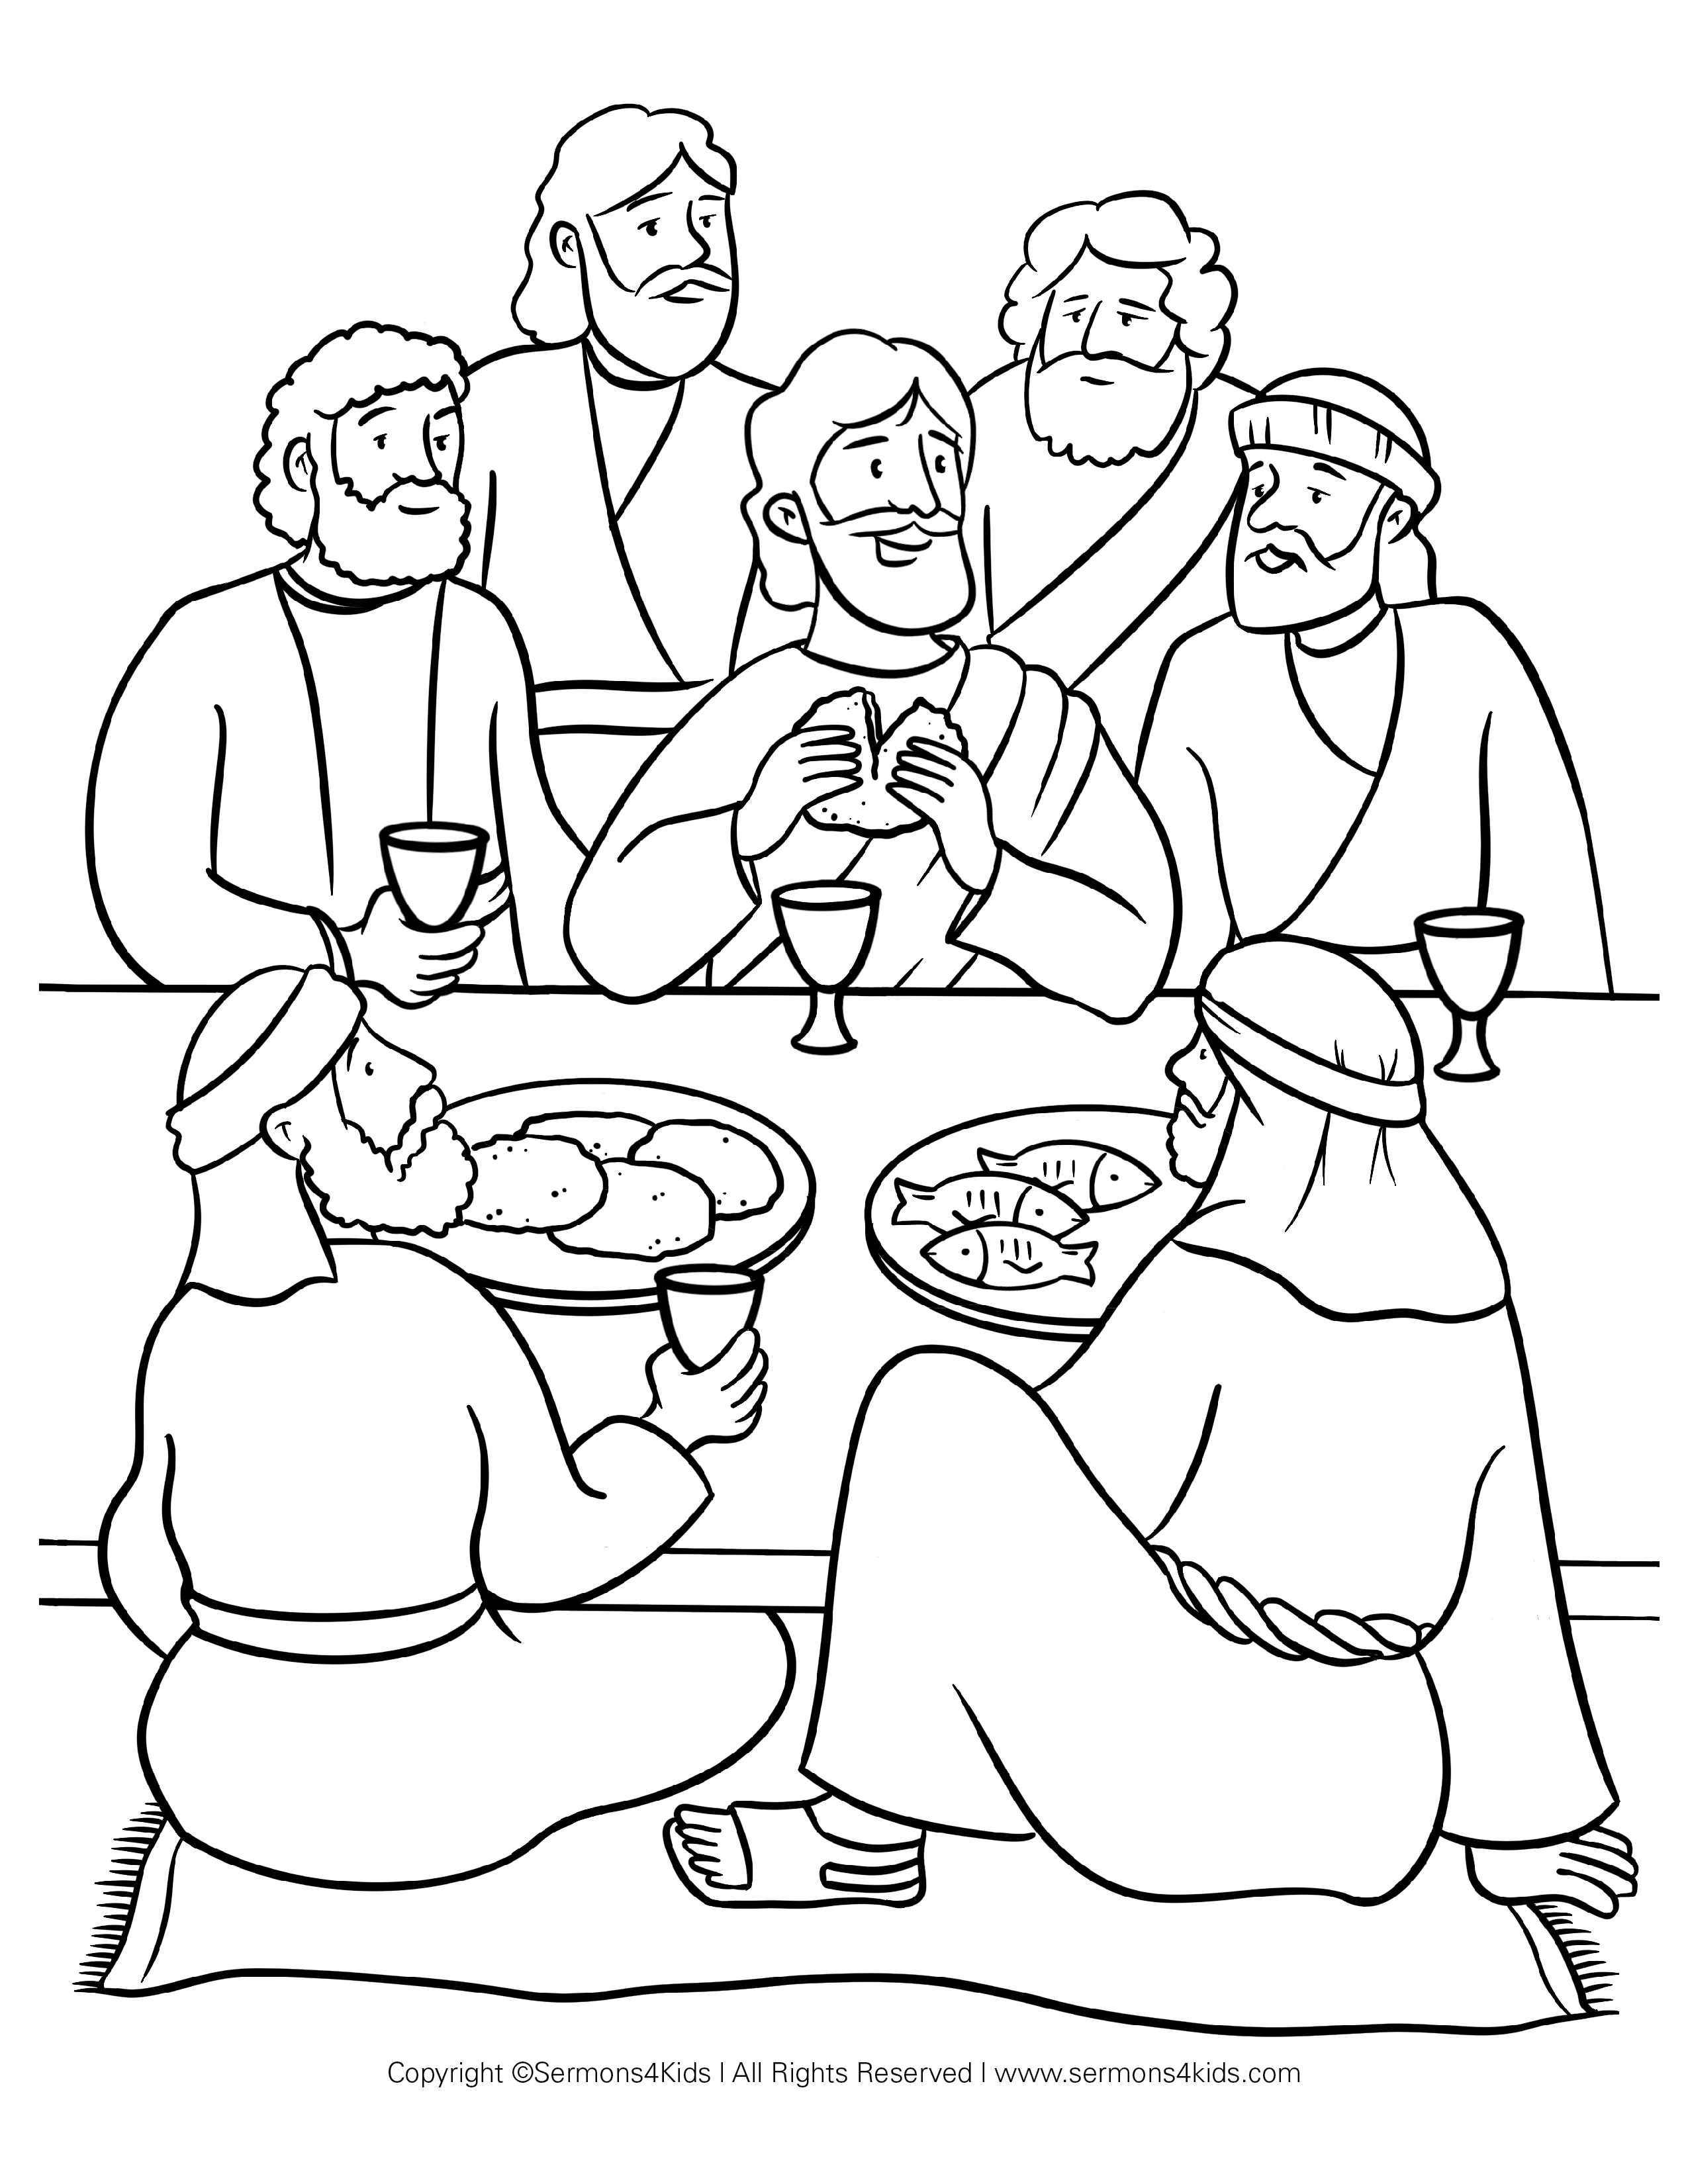 The last supper childrens sermons from sermonsk